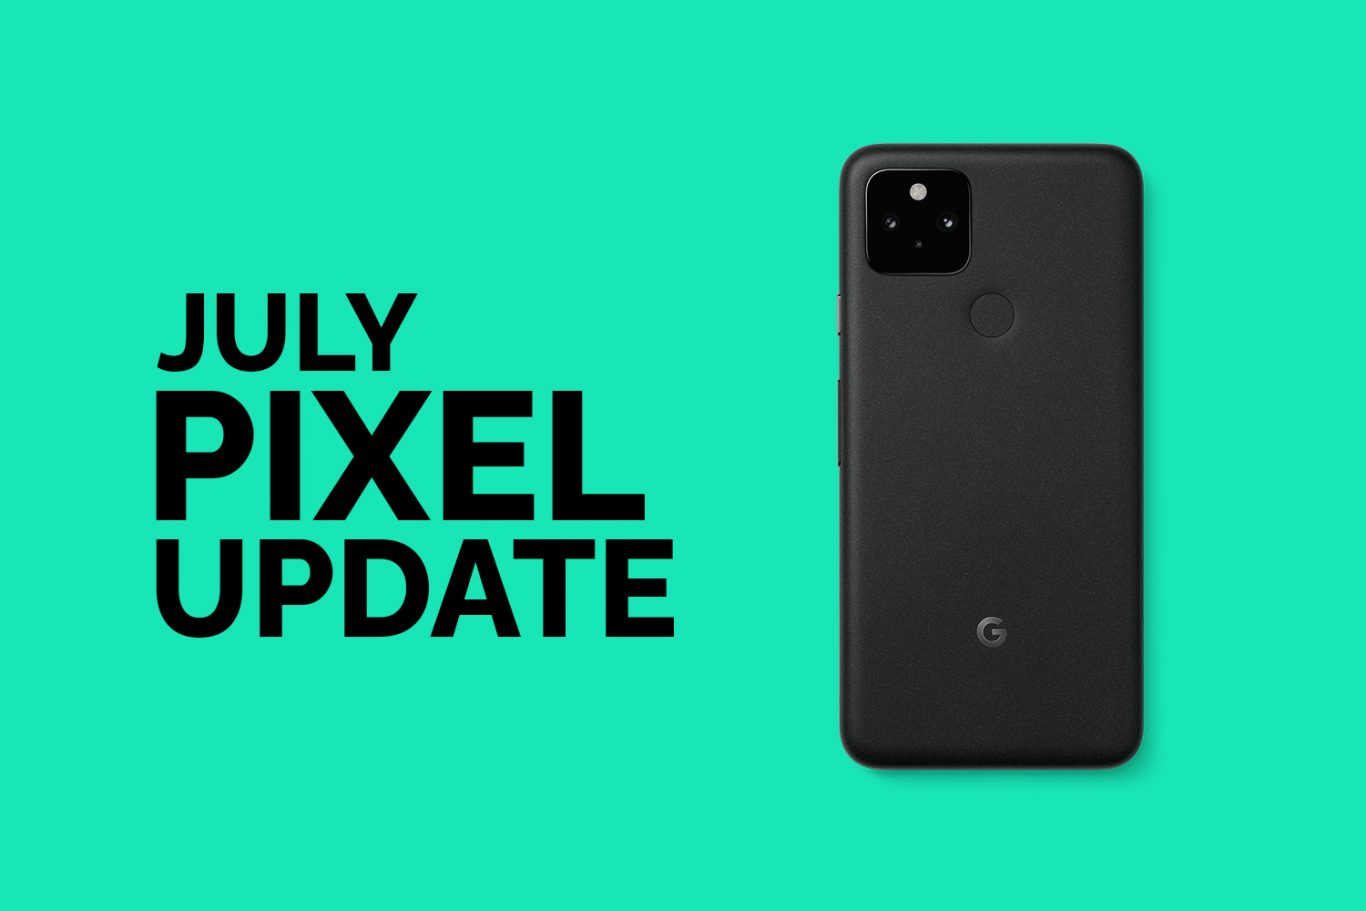 The July Google Pixel Update is Here